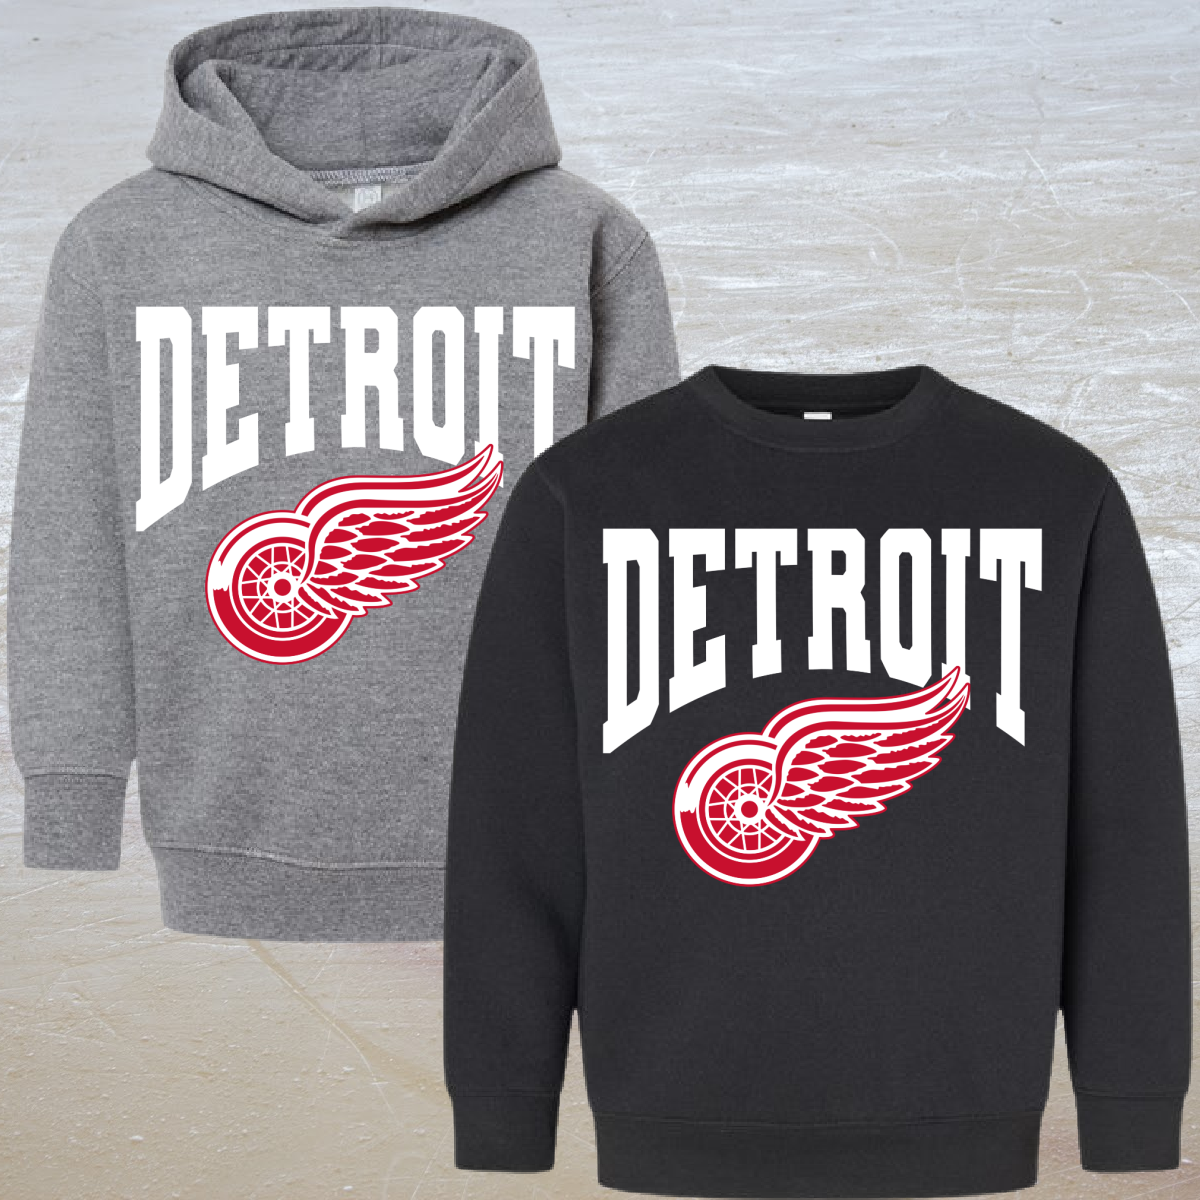 Detroit with Logo Crewneck or Hoodie (Youth) - PREORDER - WILL SHIP BY 3/11